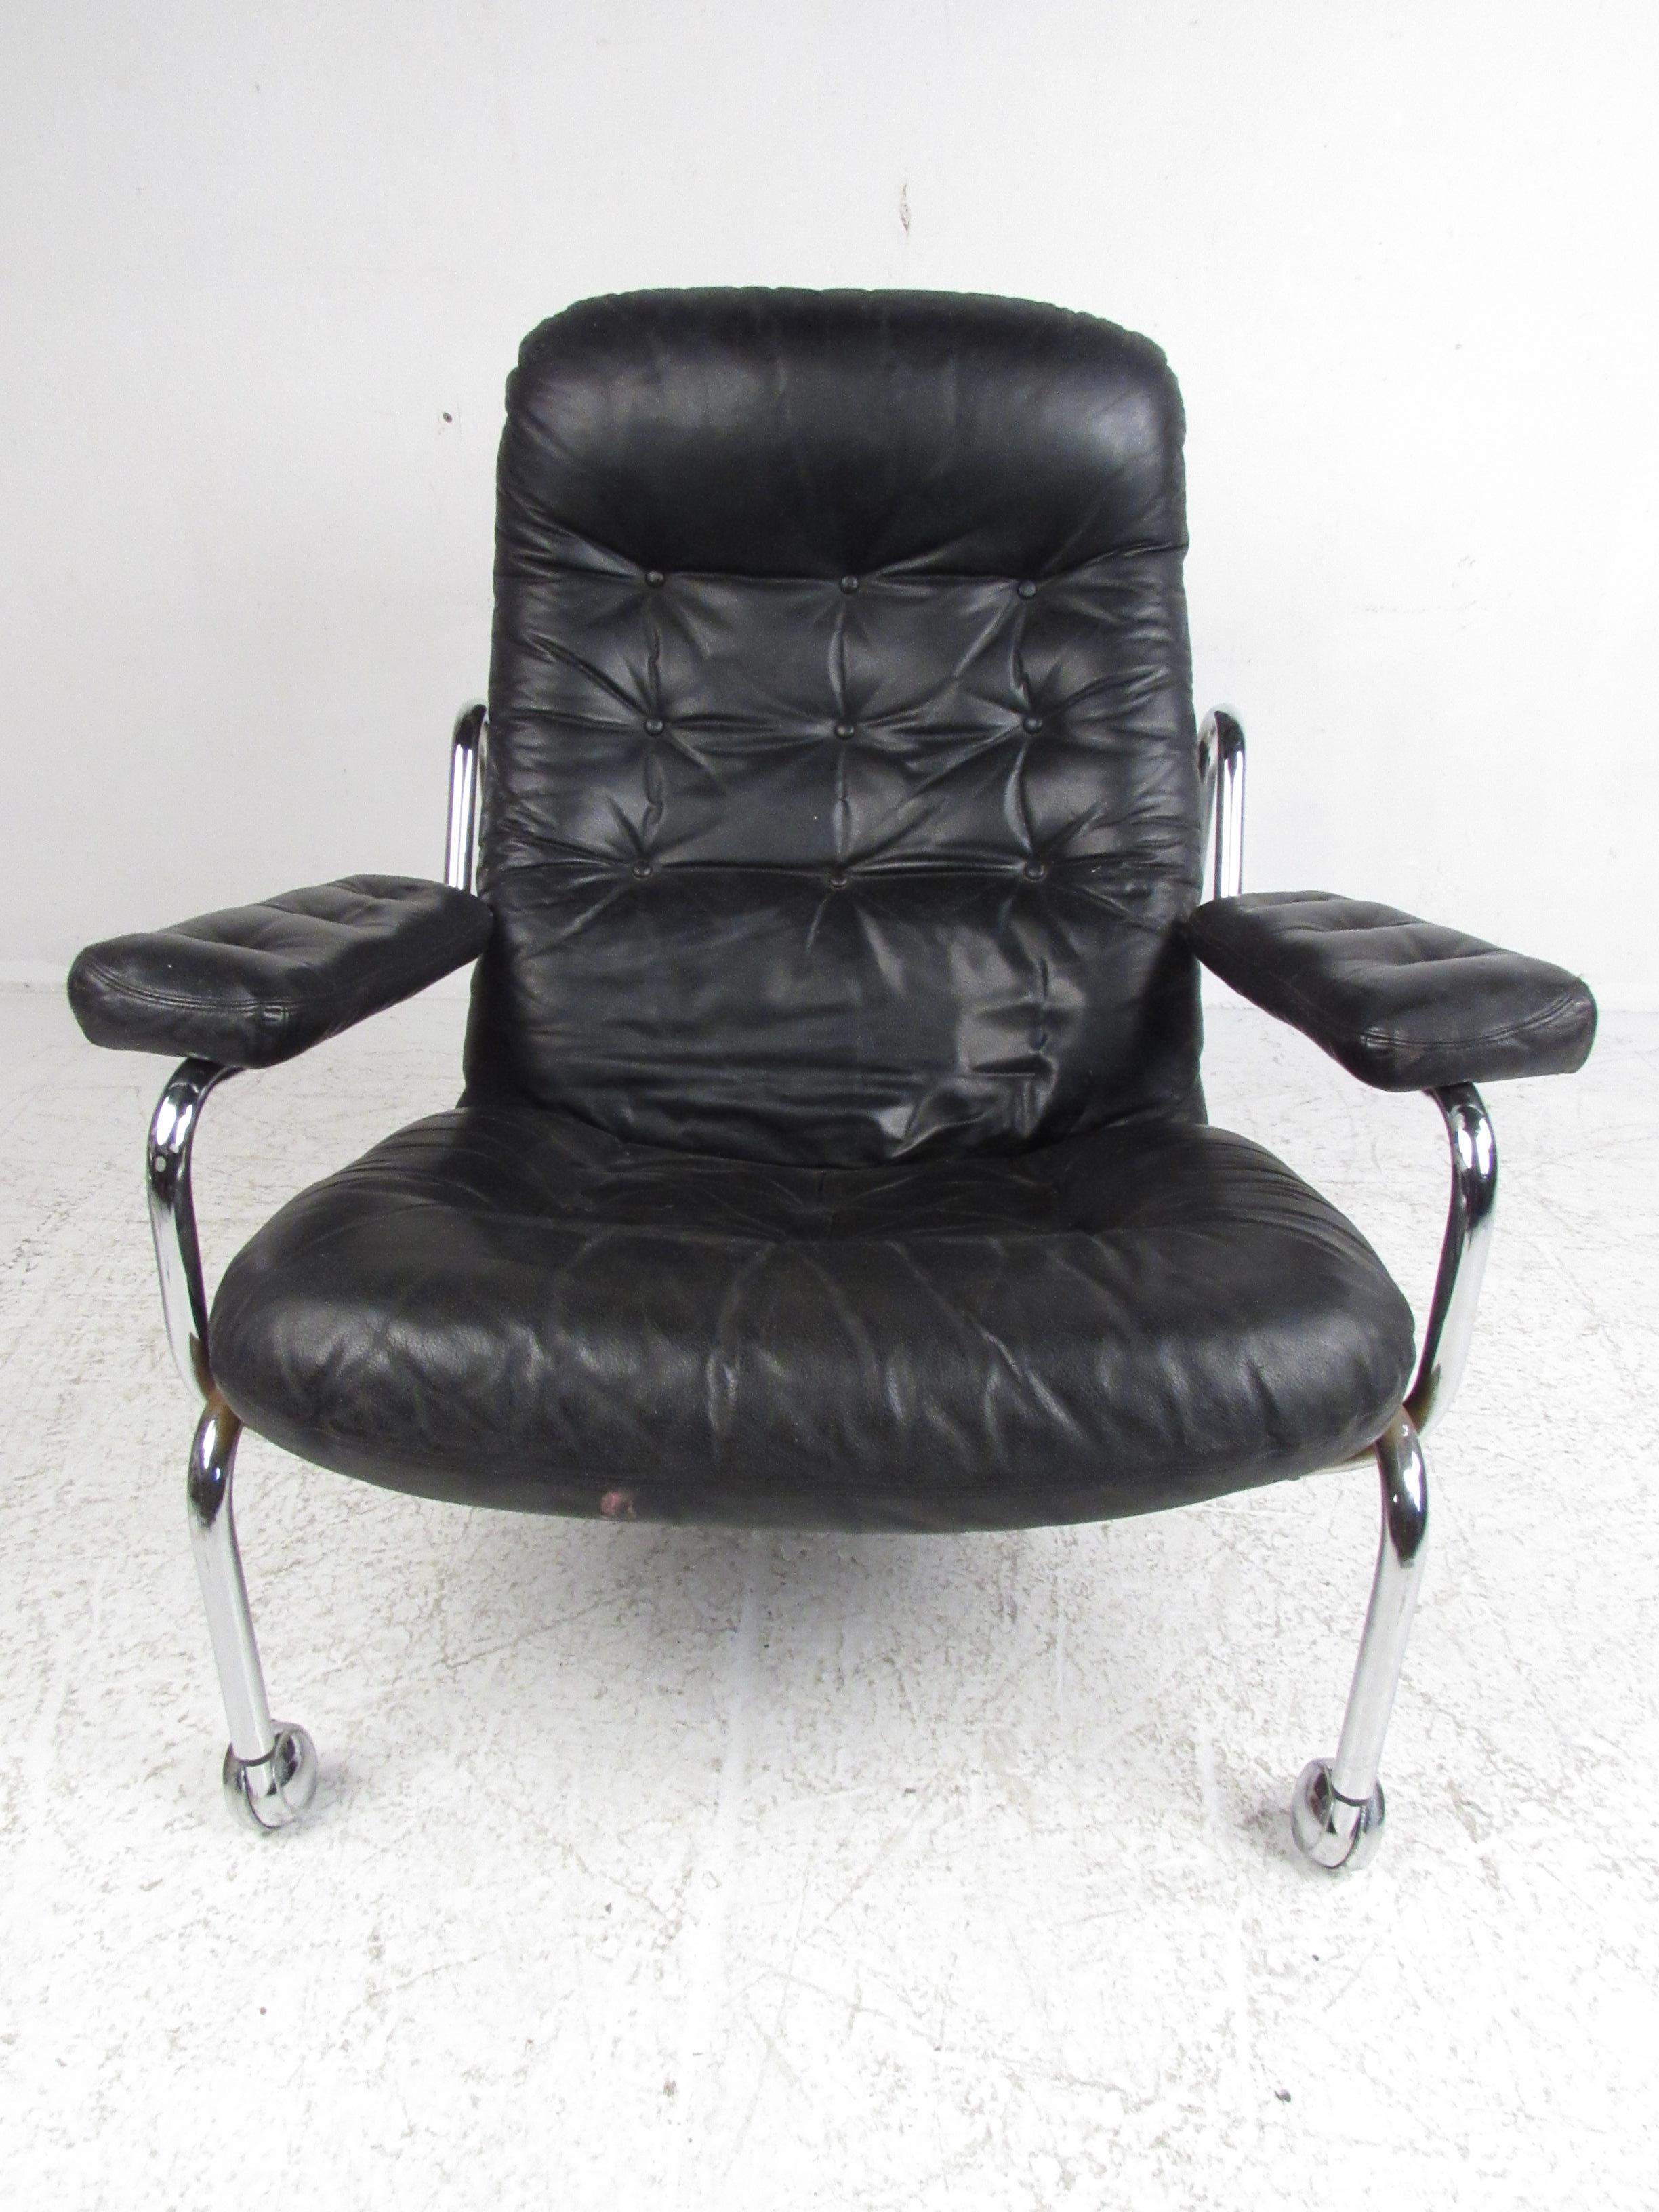 A stunning vintage modern lounge and ottoman covered in tufted black leather with a tubular chrome plated frame. This sleek lounge chair boasts thick cushioned arm rests, a sculpted frame, and castors on the front for convenience. The overstuffed